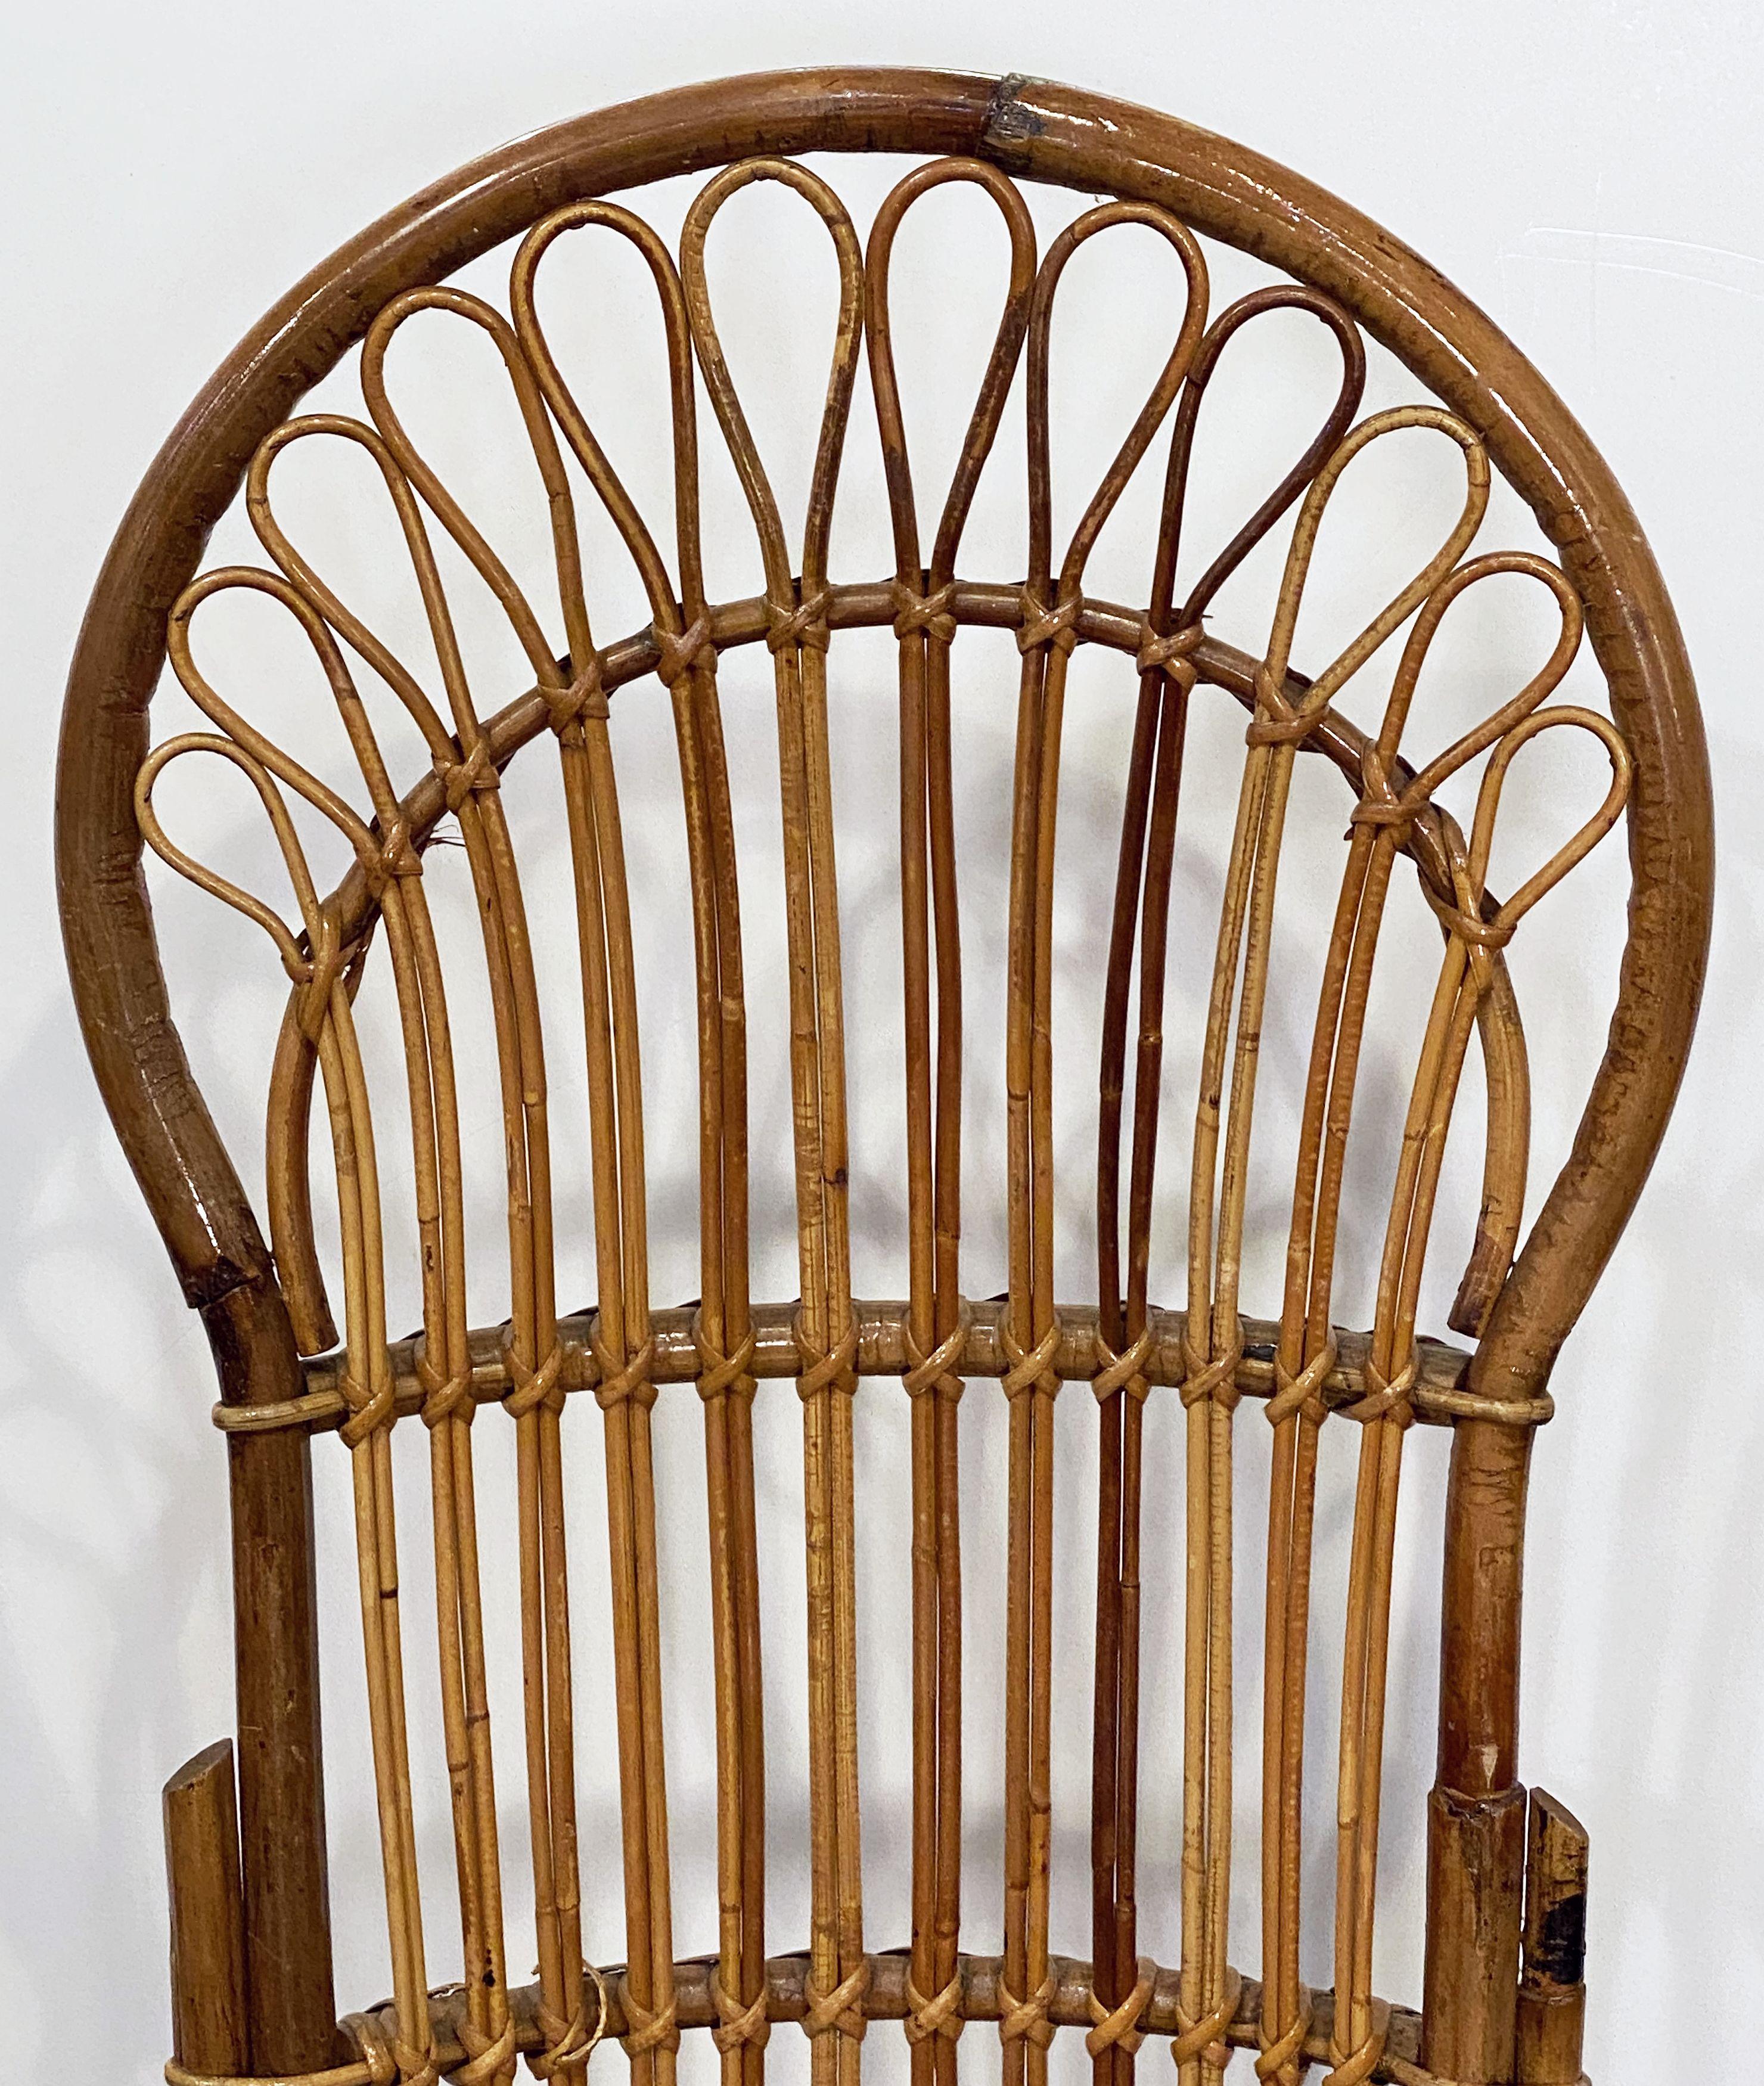 Italian Fan-Backed Chair of Rattan and Bamboo from the Mid-20th Century For Sale 4